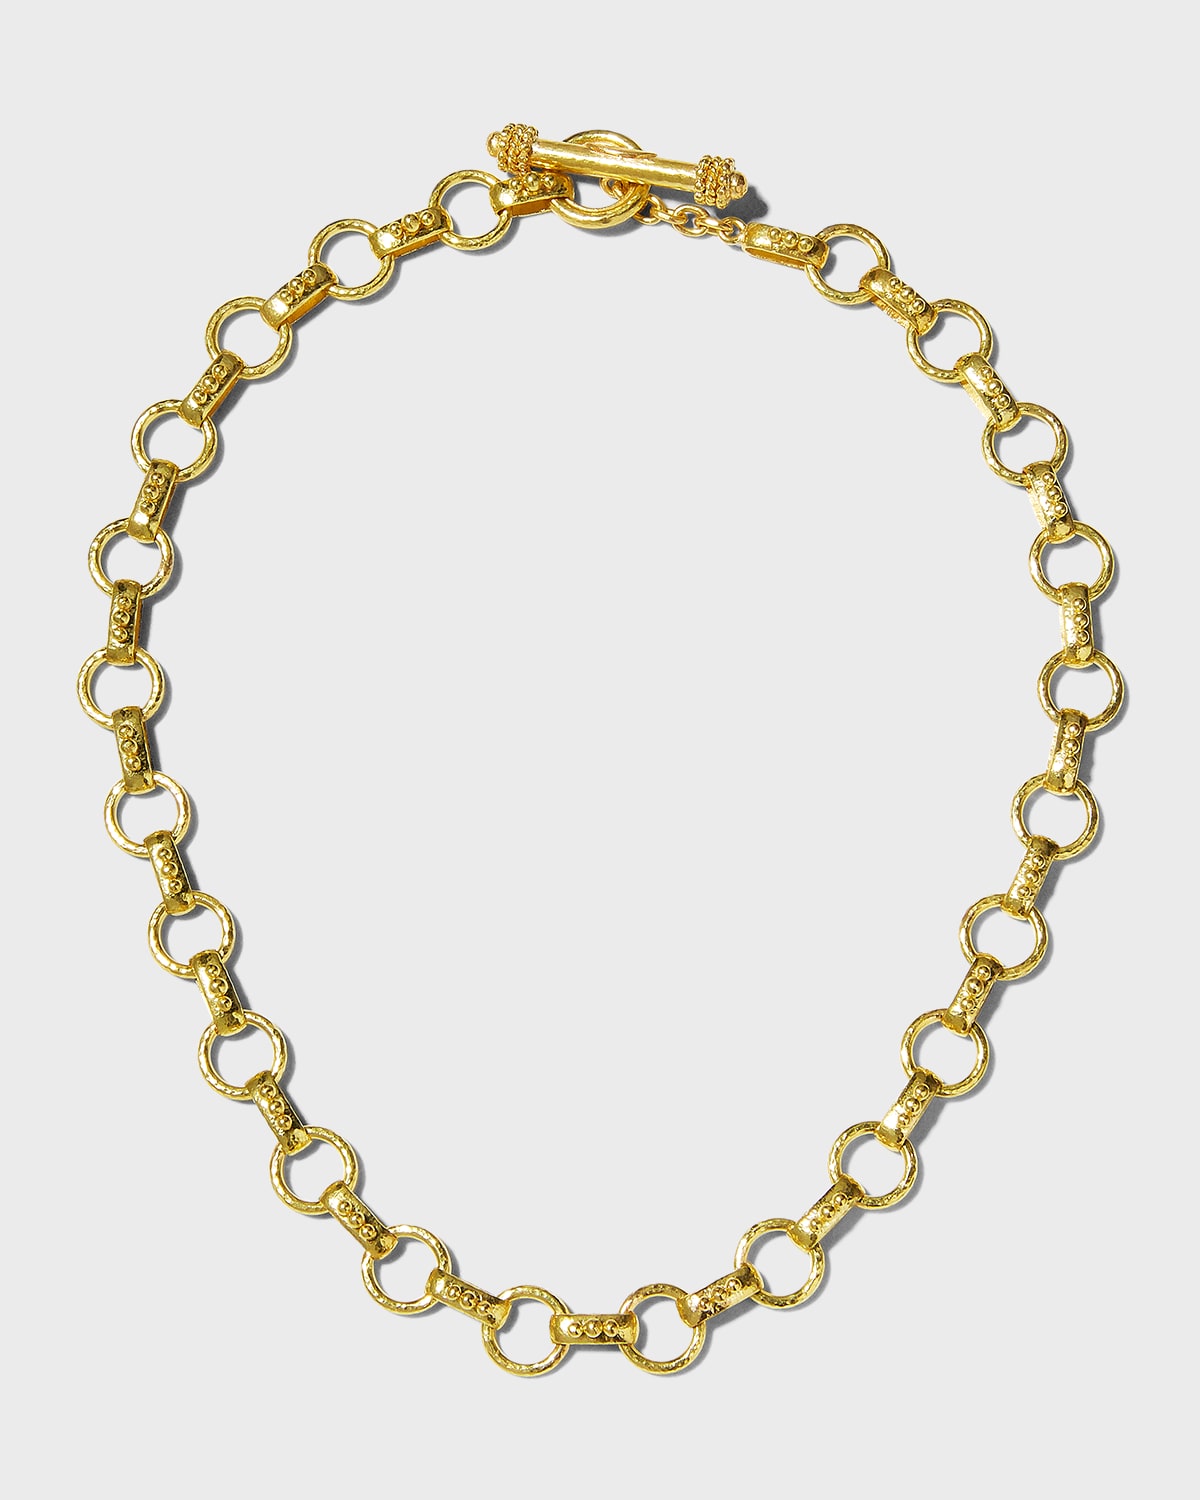 Torcello Link Necklace with Gold Toggle, 17"L